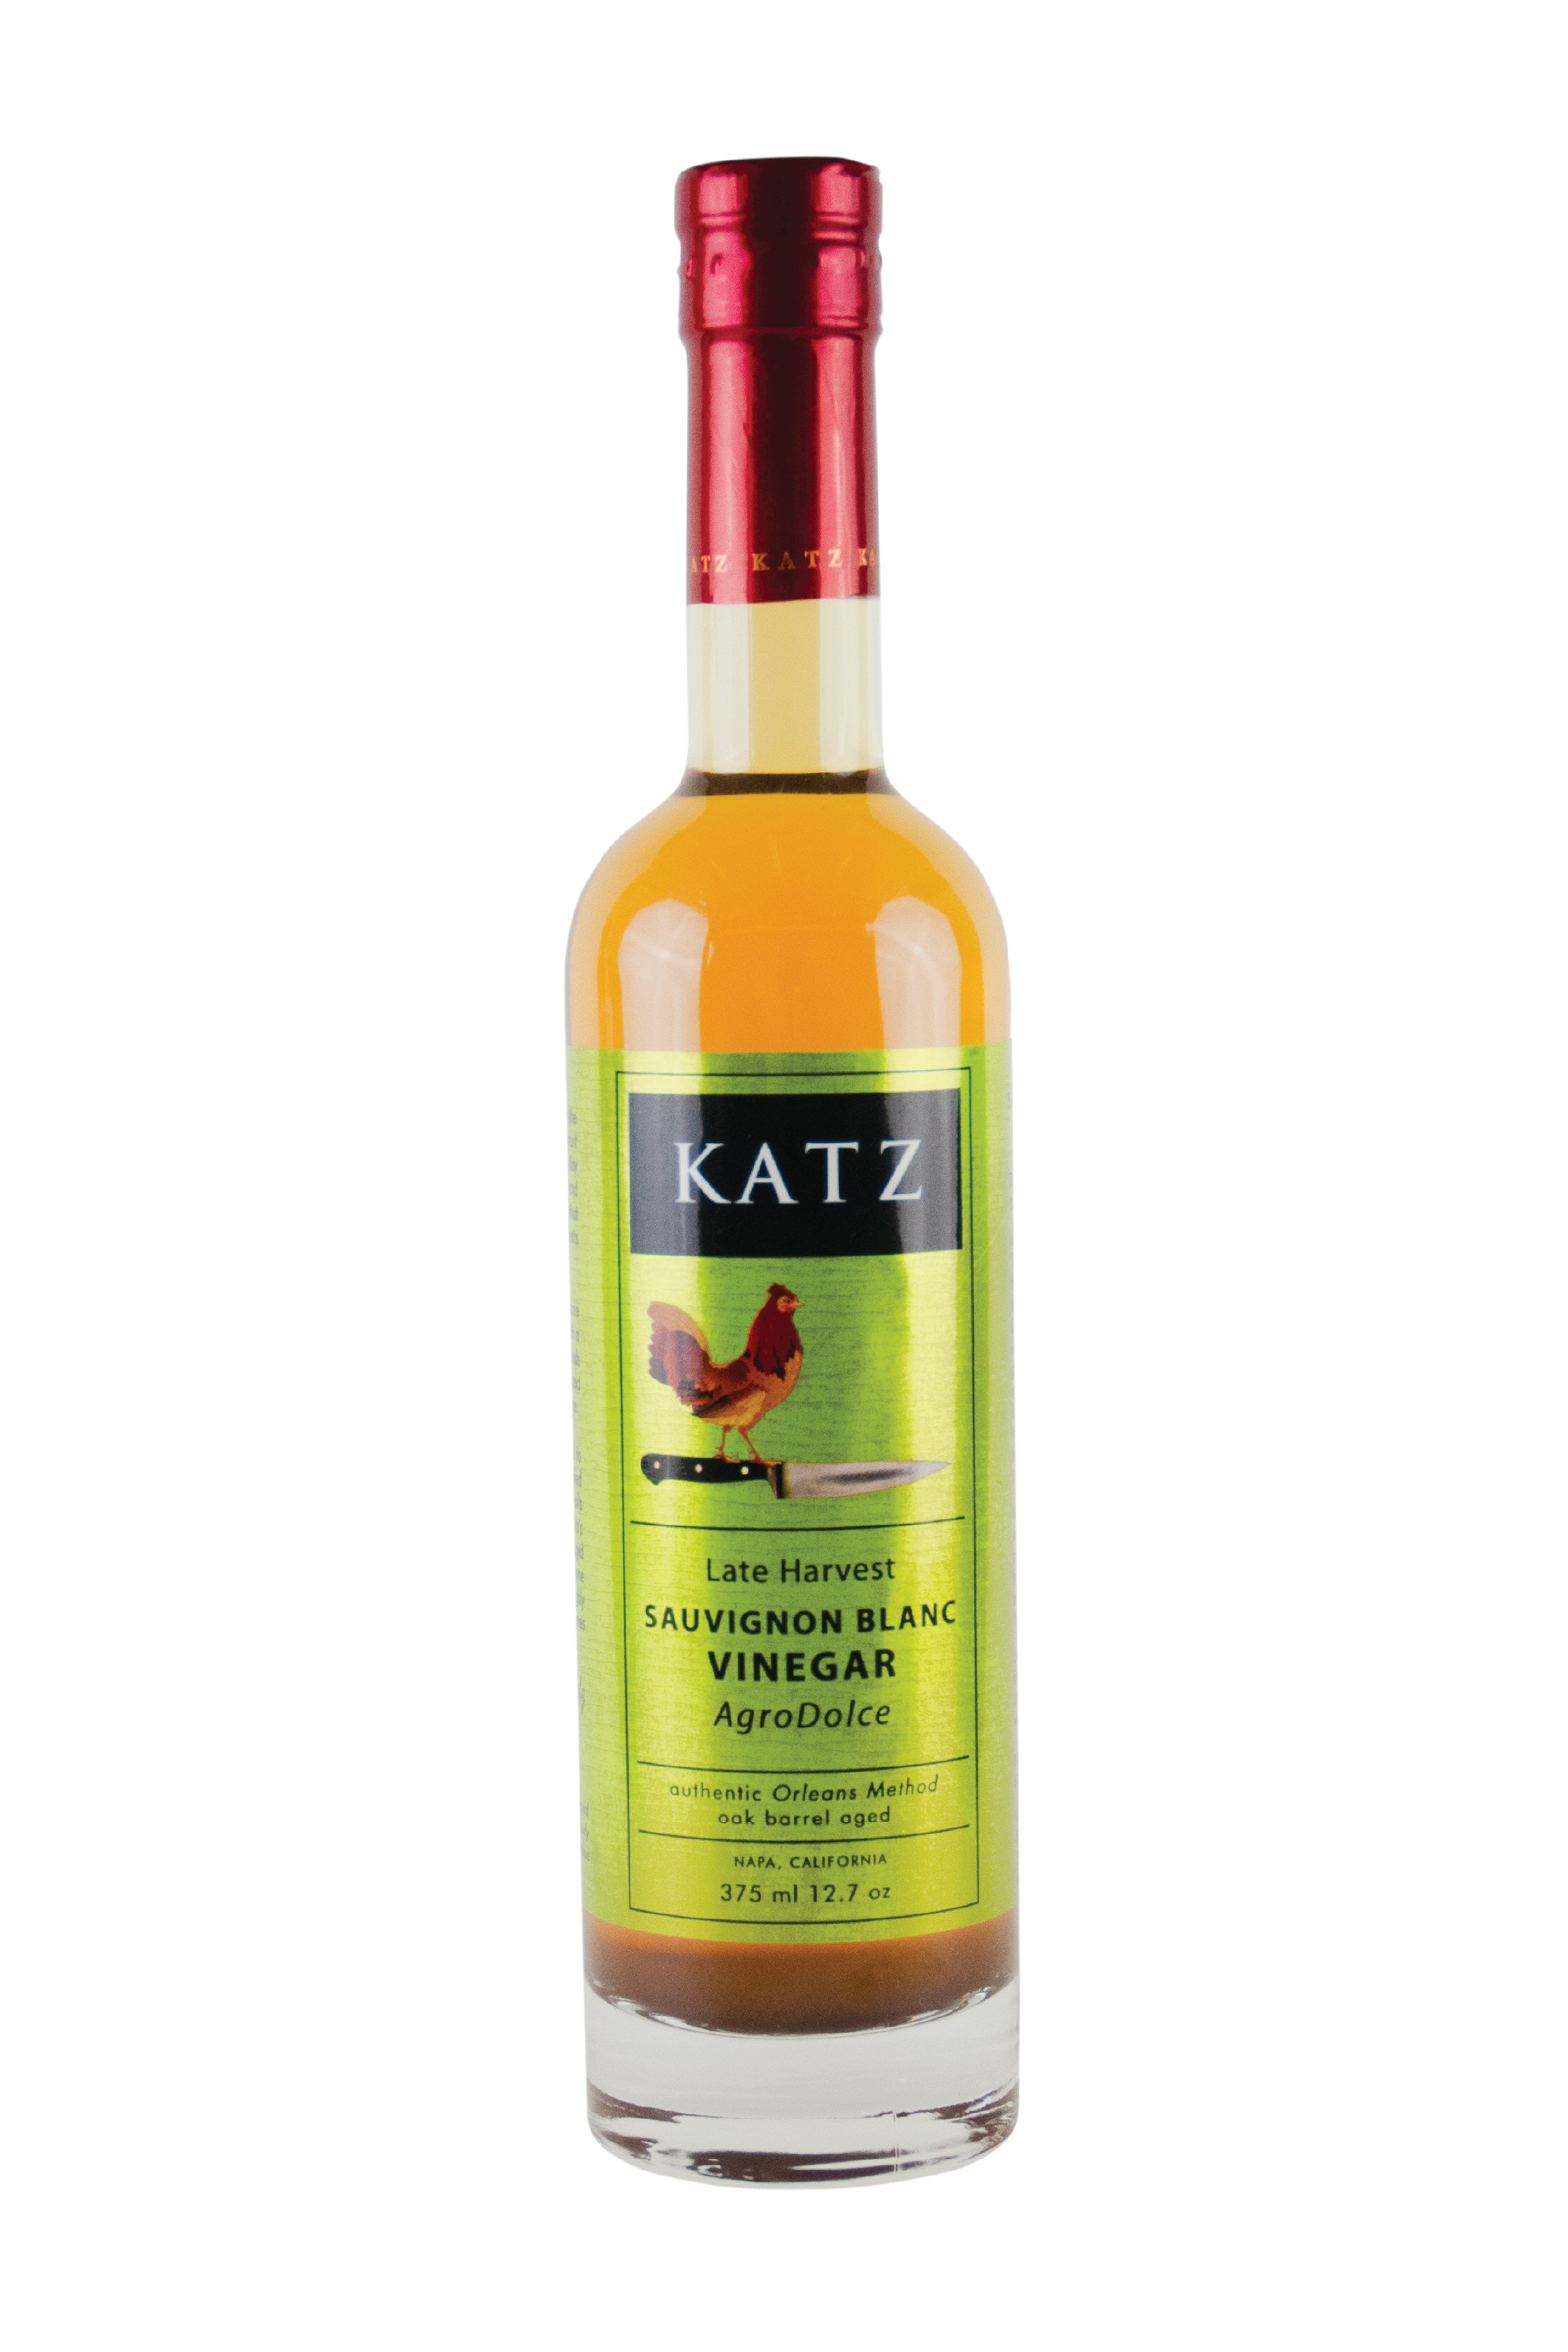 A 375 ml/12.7 oz glass bottle of Katz Late Harvest Sauvignon Blanc Agrodolce Vinegar on a white background. Label is light metallic green and black with the image of a rooster standing on the hilt of a chef's knife and the words, "Authentic Orleans Method, oak barrel aged" and "Napa, California" on the bottle. Vinegar is a muted yellow-orange, visible through the clear glass bottle, with red foil shrink wrap on the top with the word "Katz" printed around the circumference.